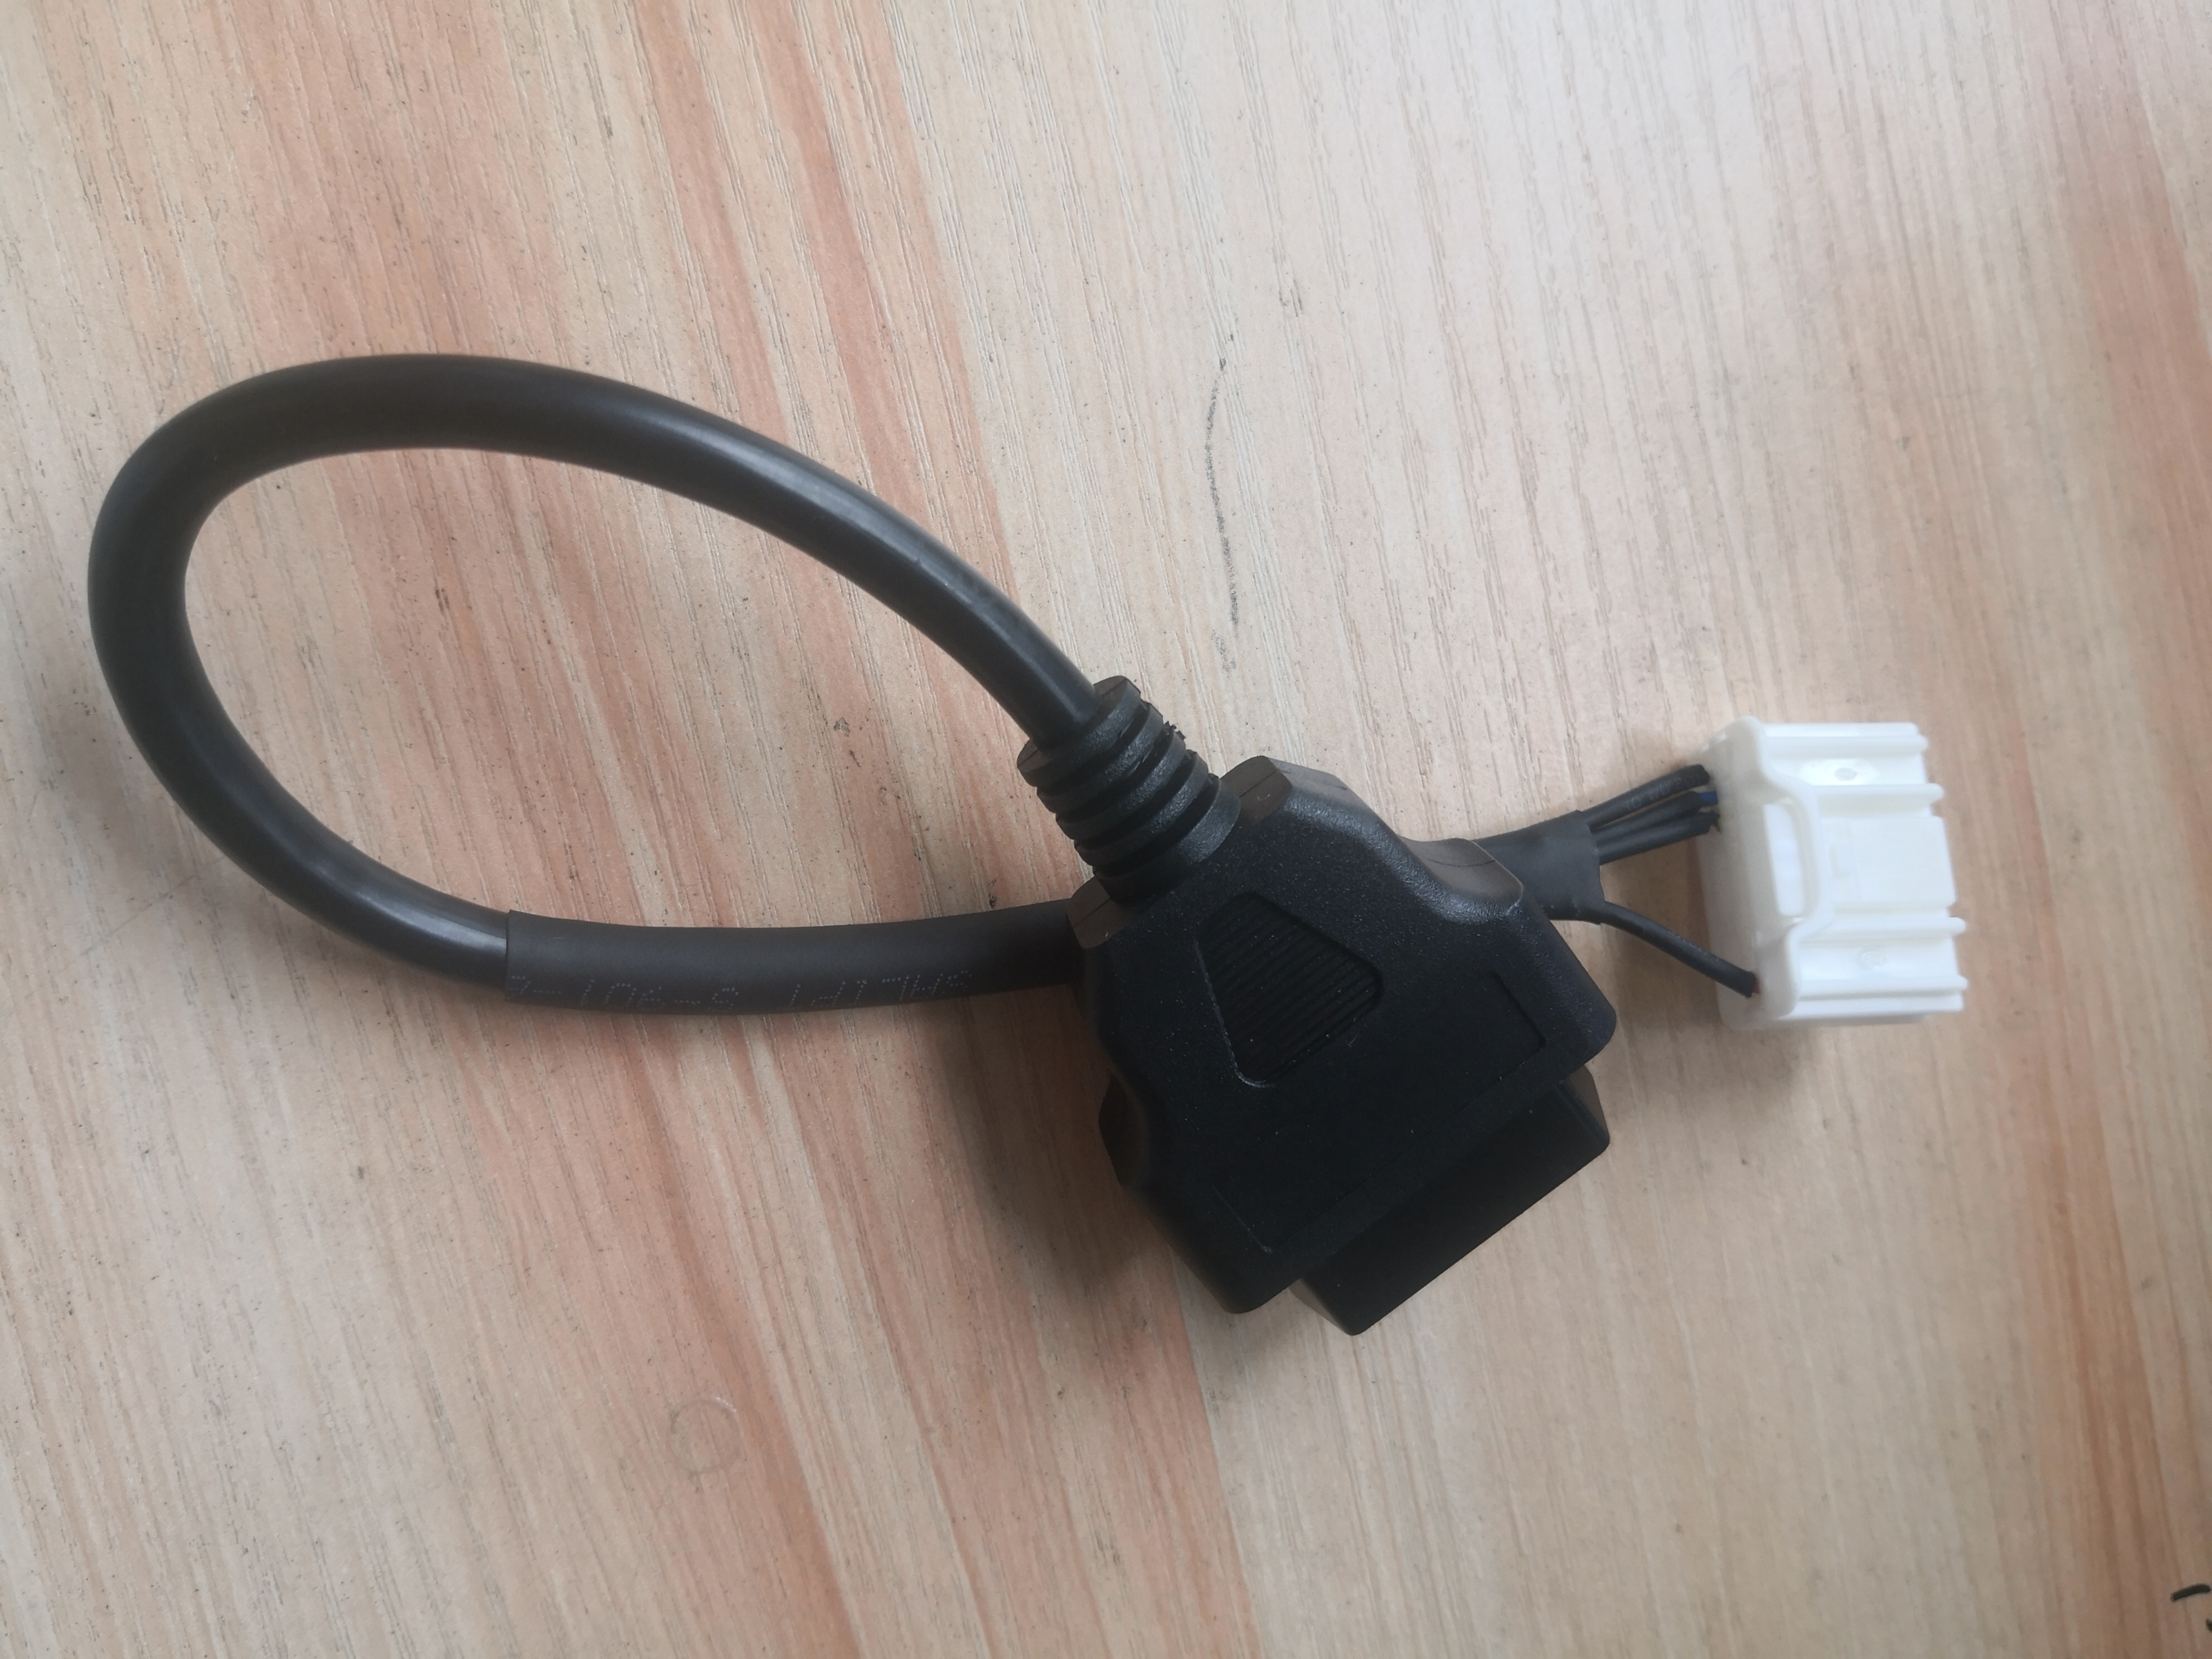 20 pin connector after 2015 New Tesla model S/X OBD II diagnostic harness electronic cable of new energy vehicle